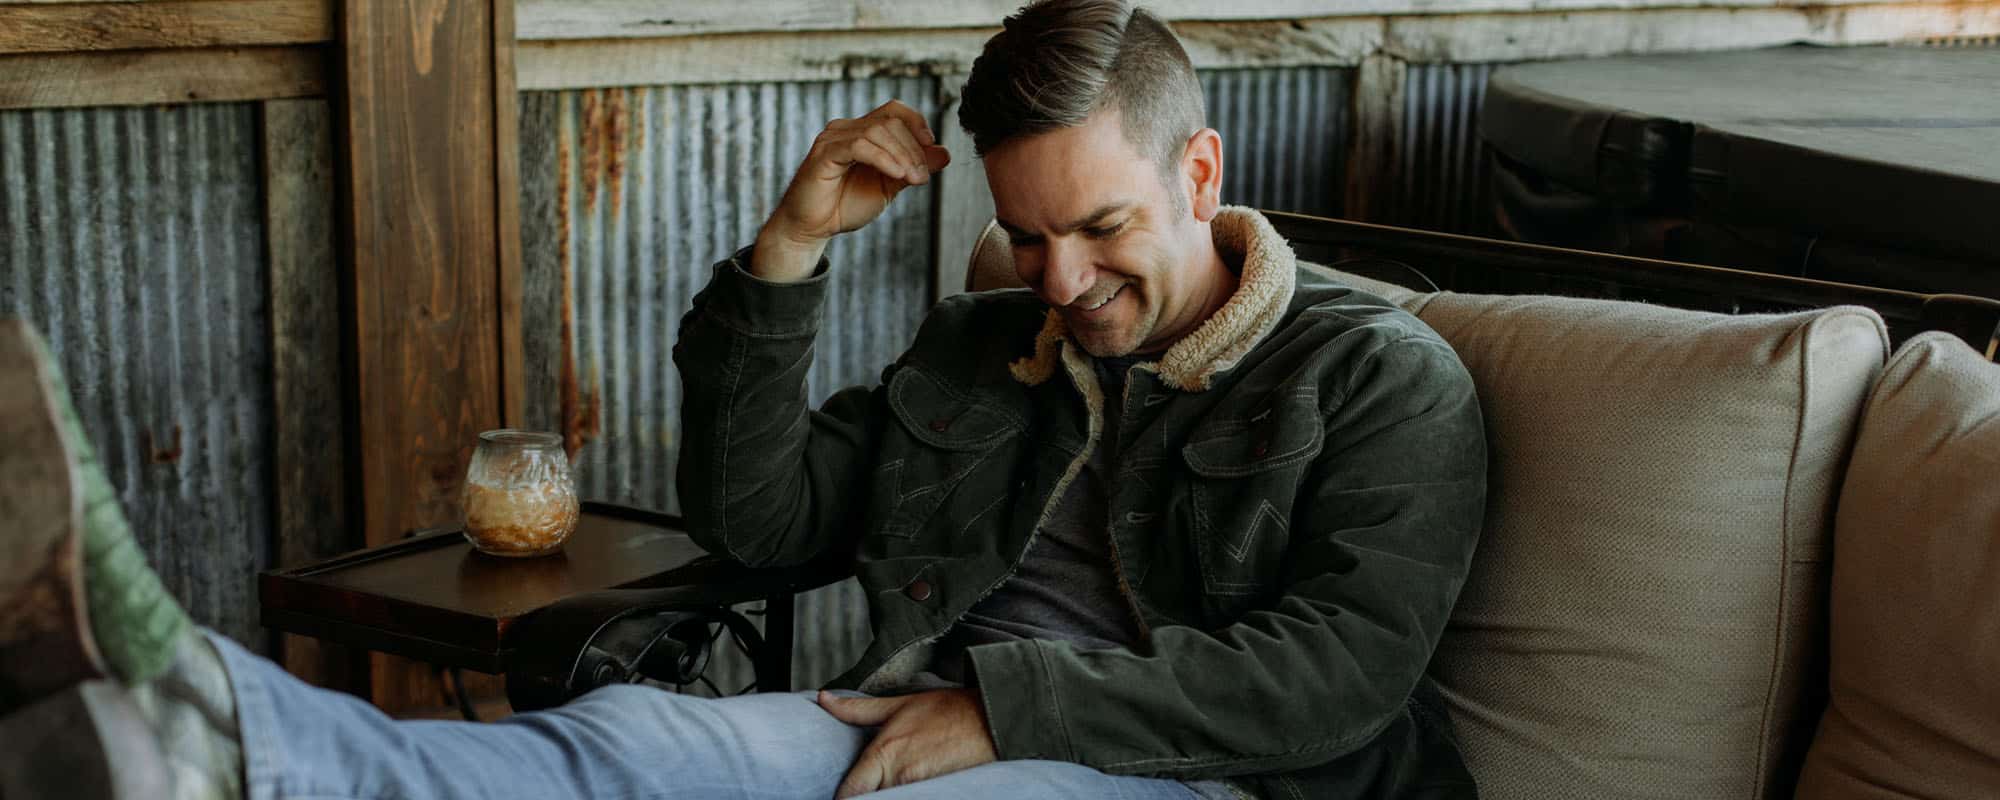 Country Hitmaker Craig Campbell Gets Some Major Points with New Single “What a Girl Will Make You Do”